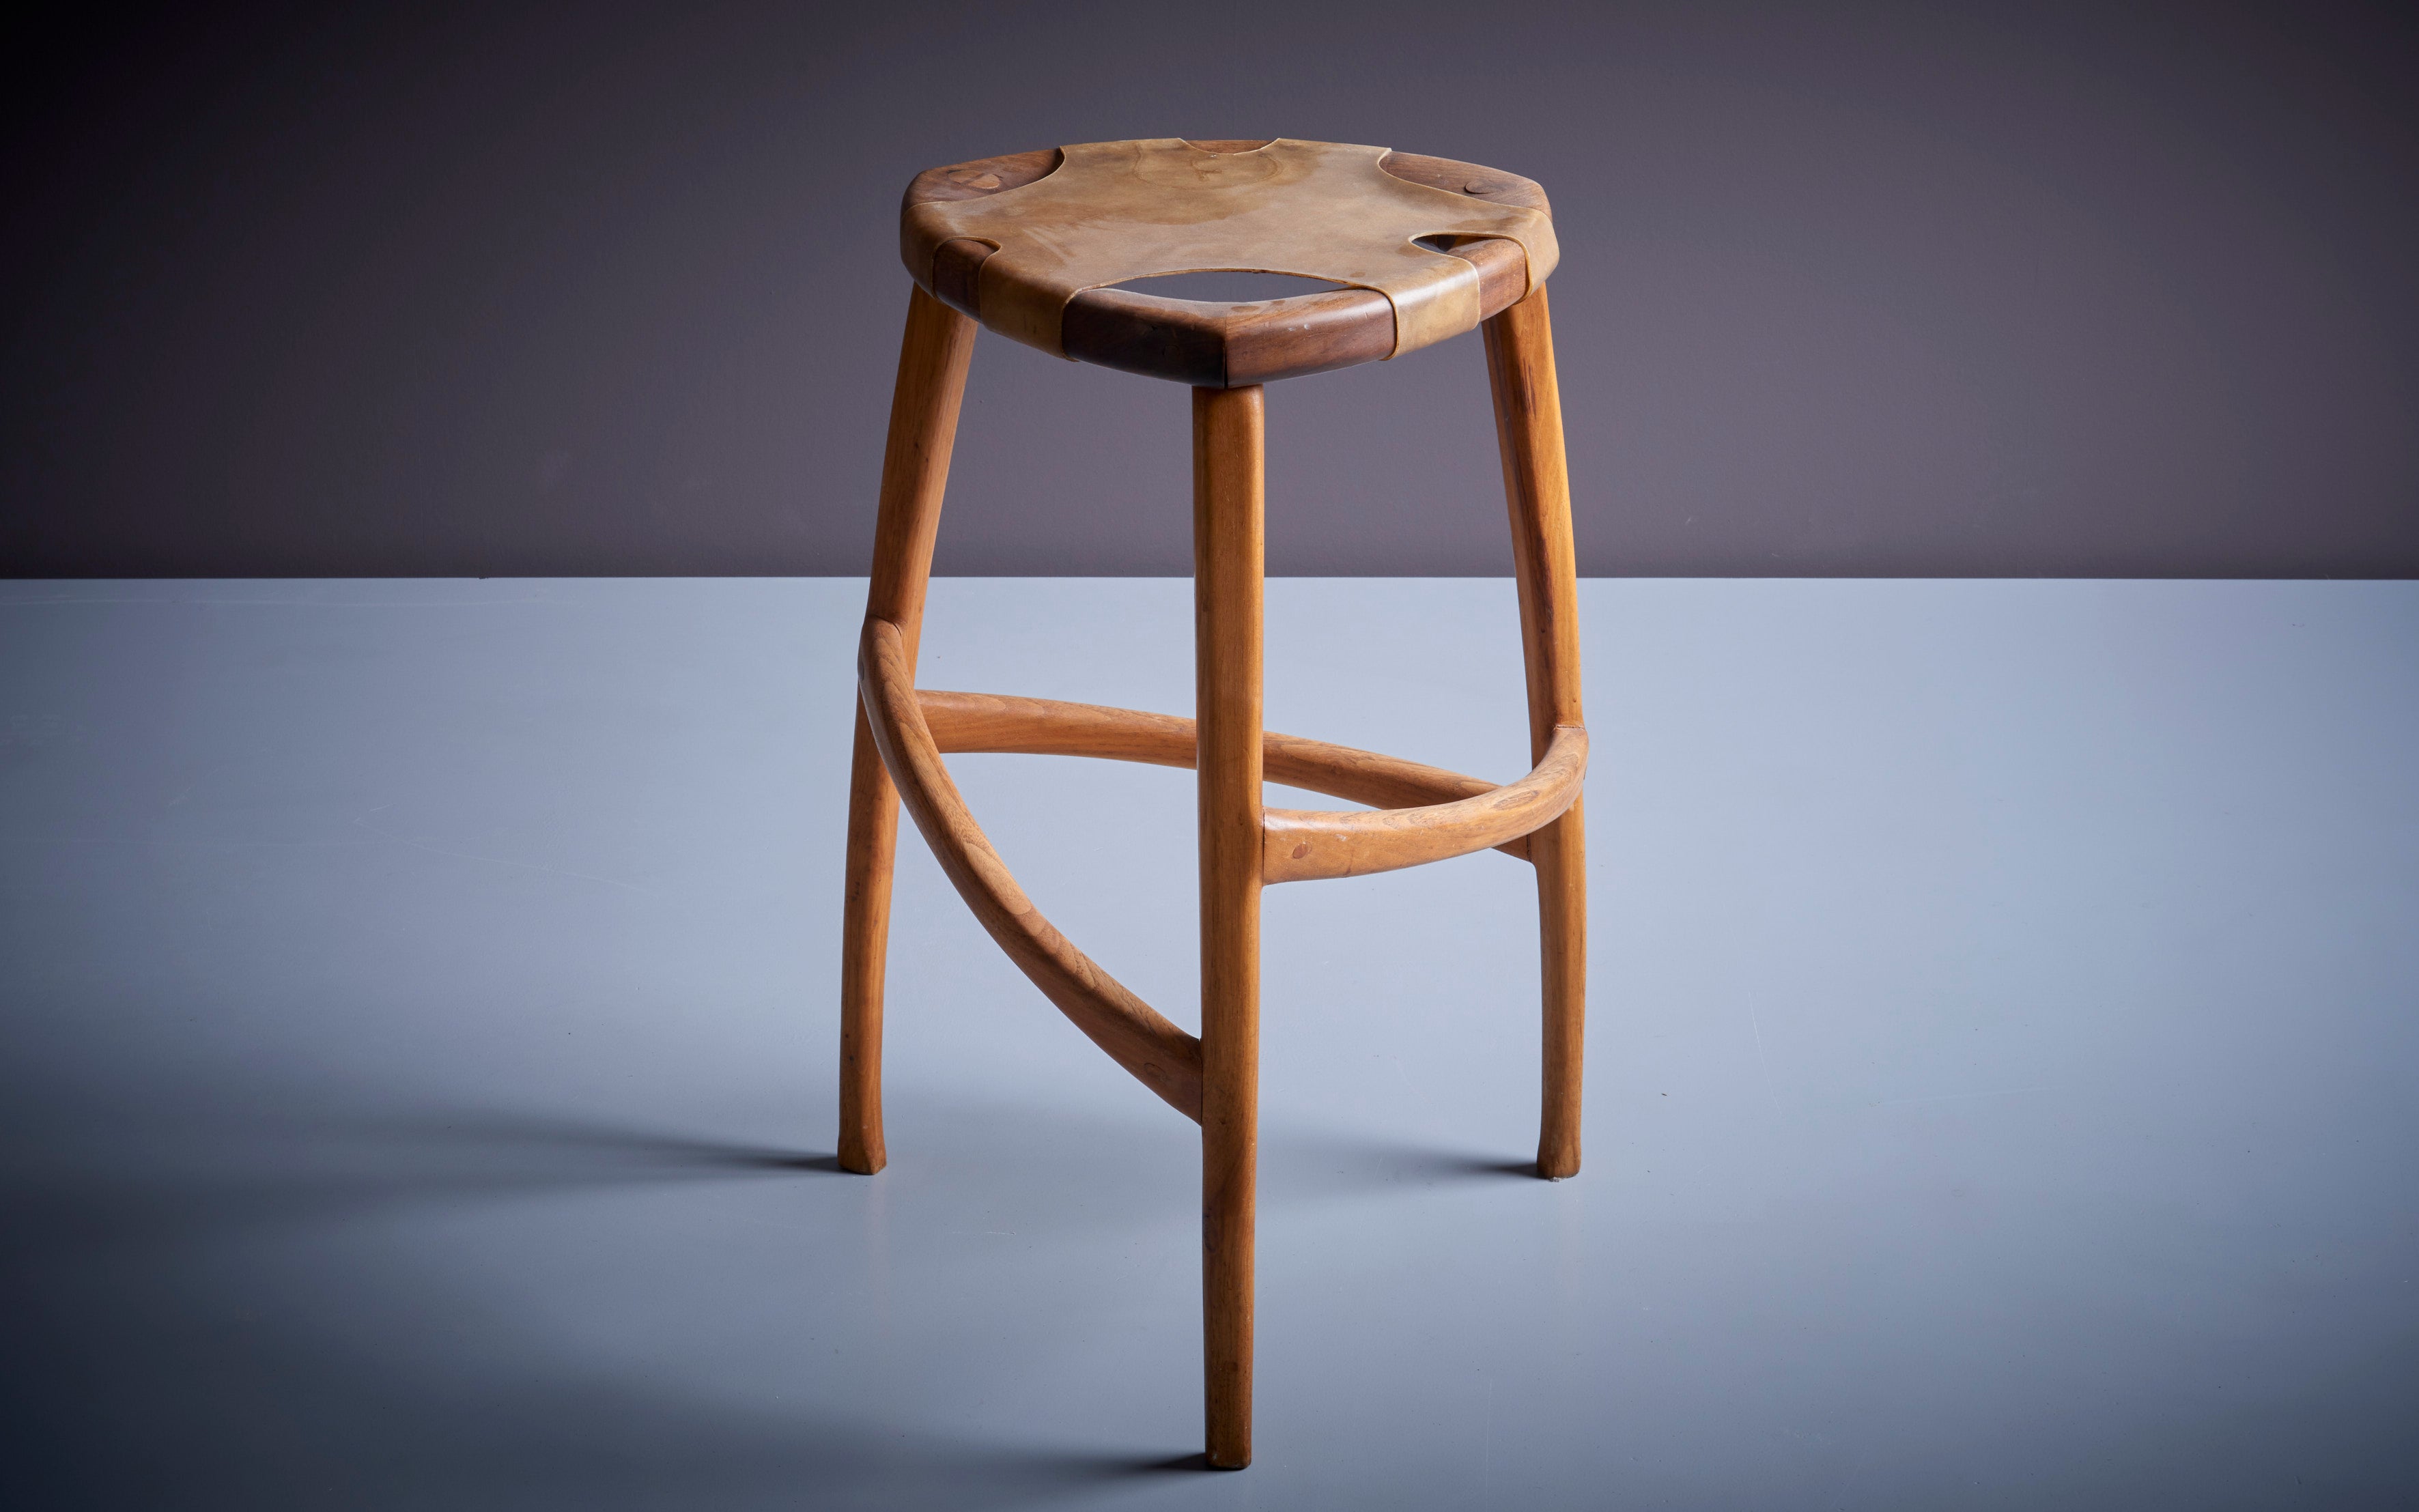 Bar stool in Rawhide by Arthur Espenet Carpenter, 1960s. Arthur Espenet Carpenter (1920-2006) was an American furniture designer and craftsman. He was born in San Francisco, California and studied art and design at the California School of Fine Arts